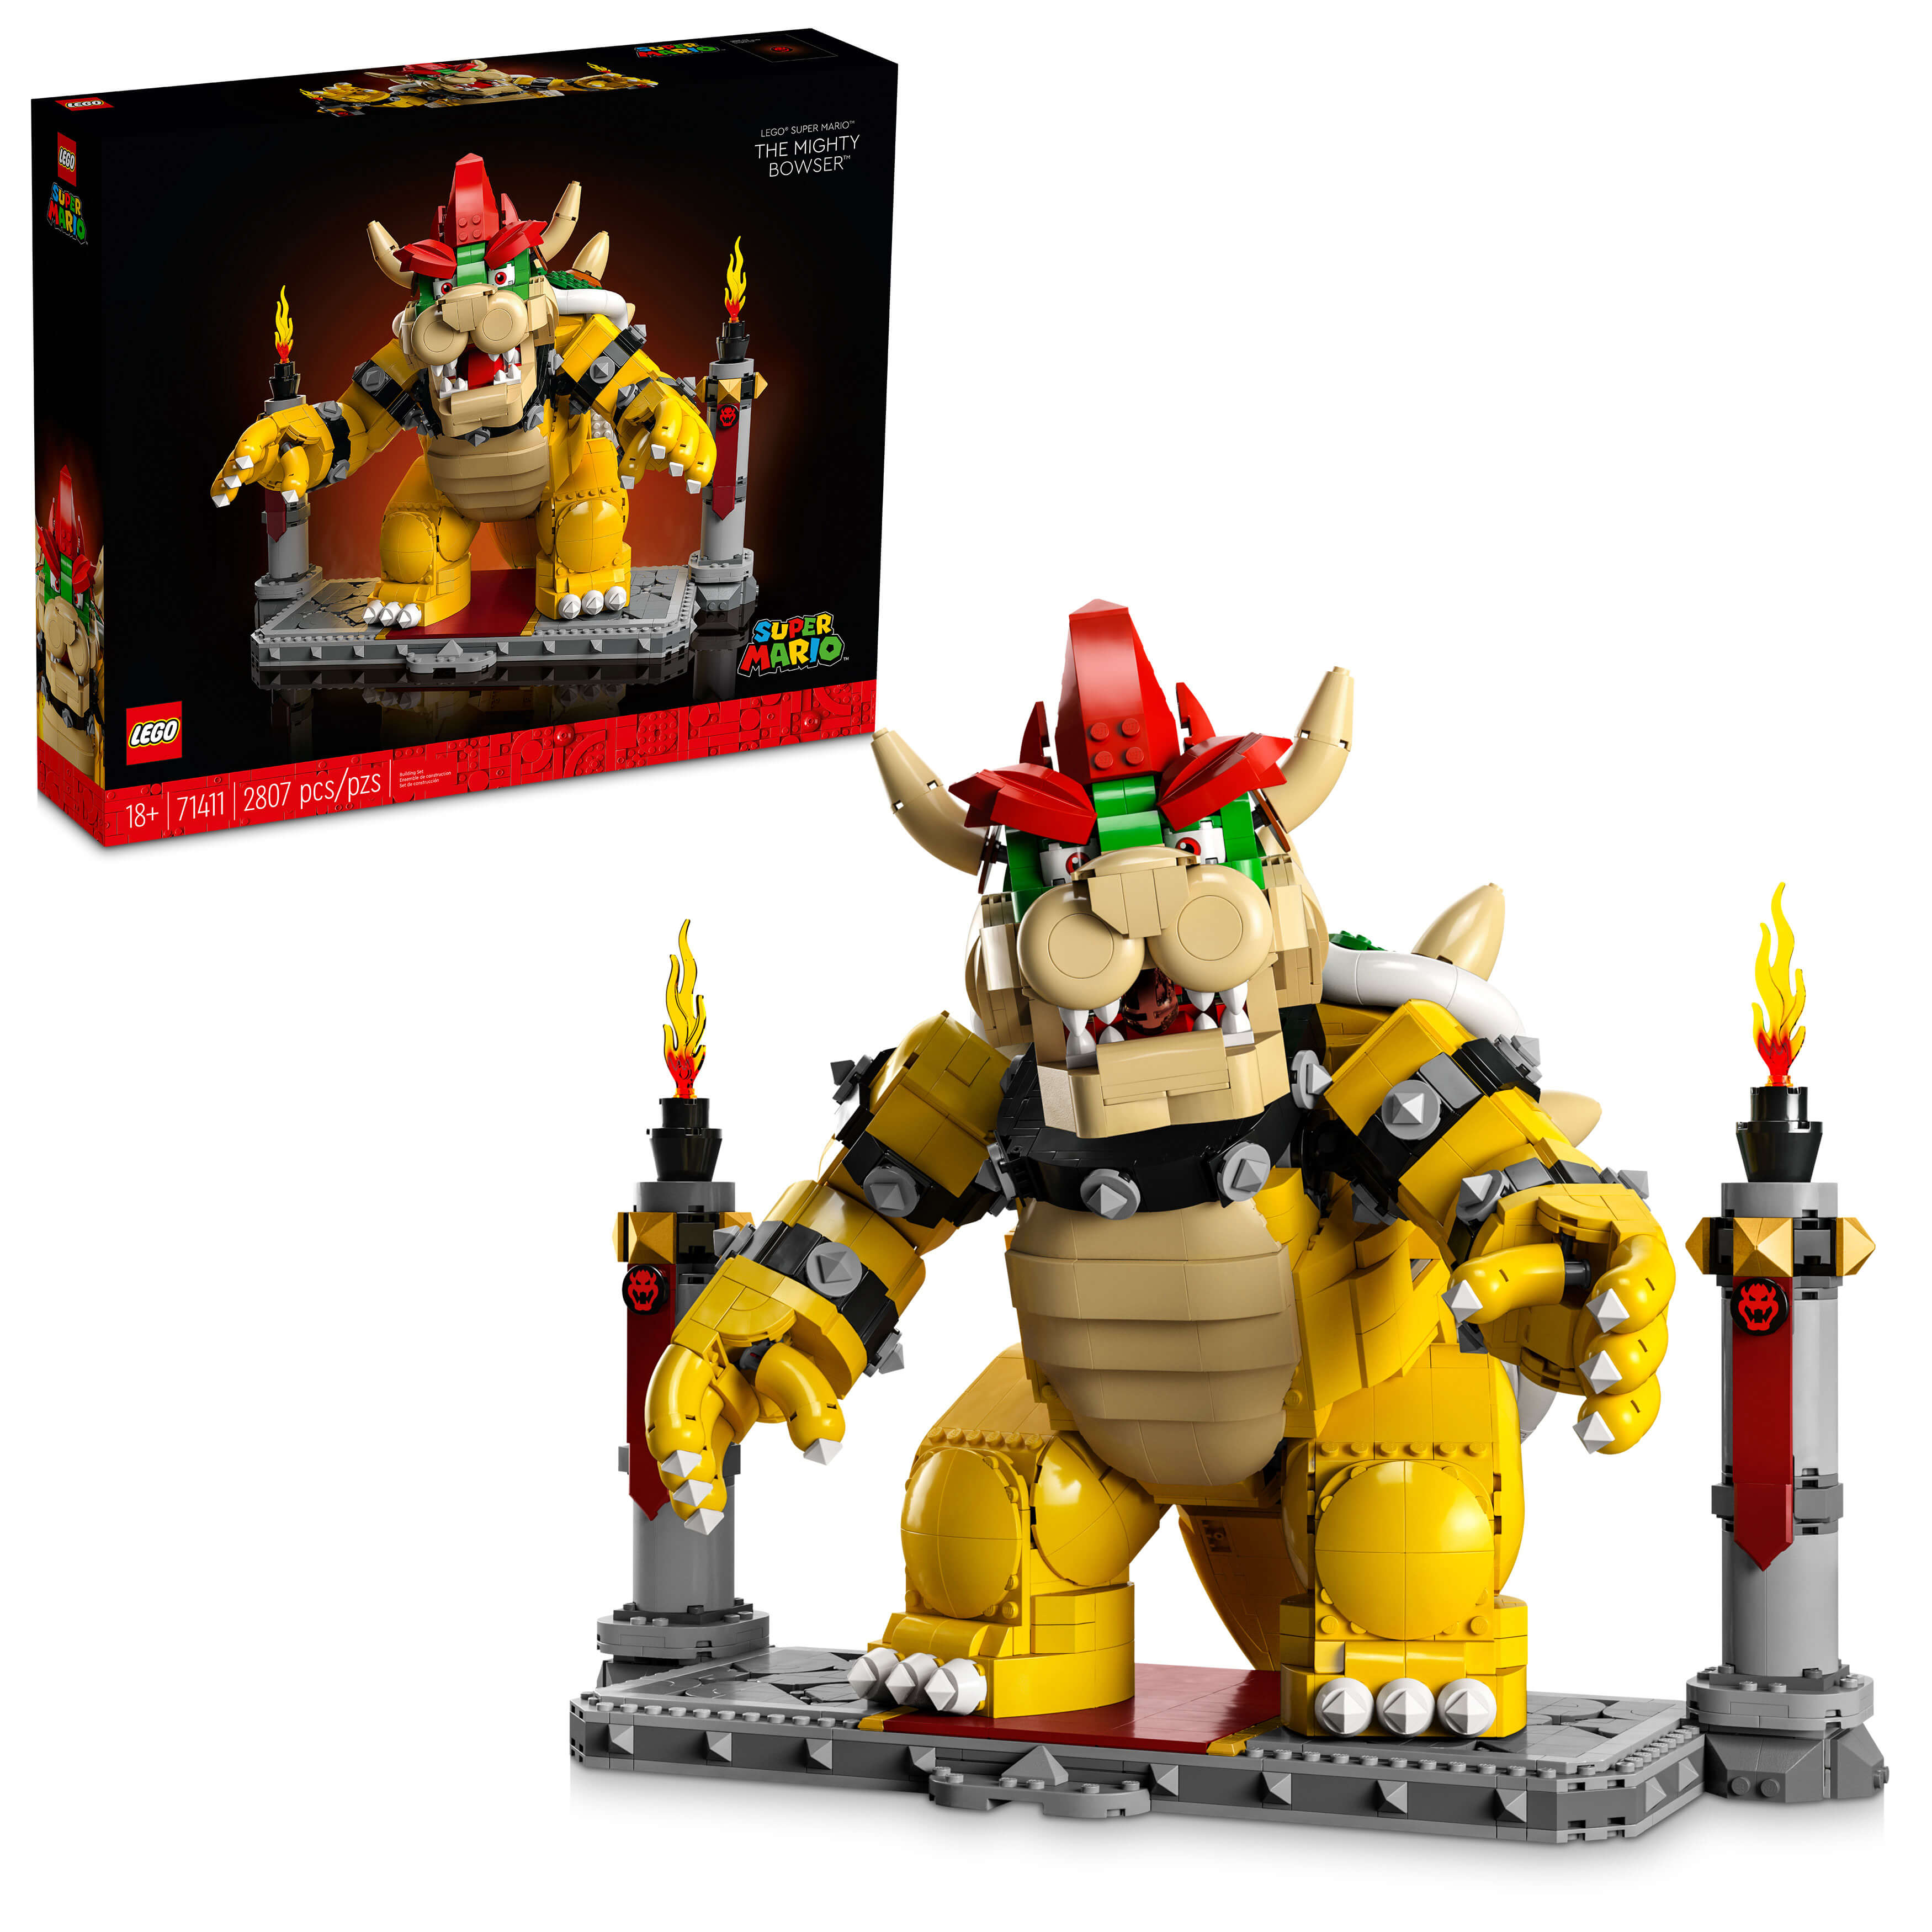 LEGO® Super Mario The Mighty Bowser 71411 Building Kit (2,807 Pieces)